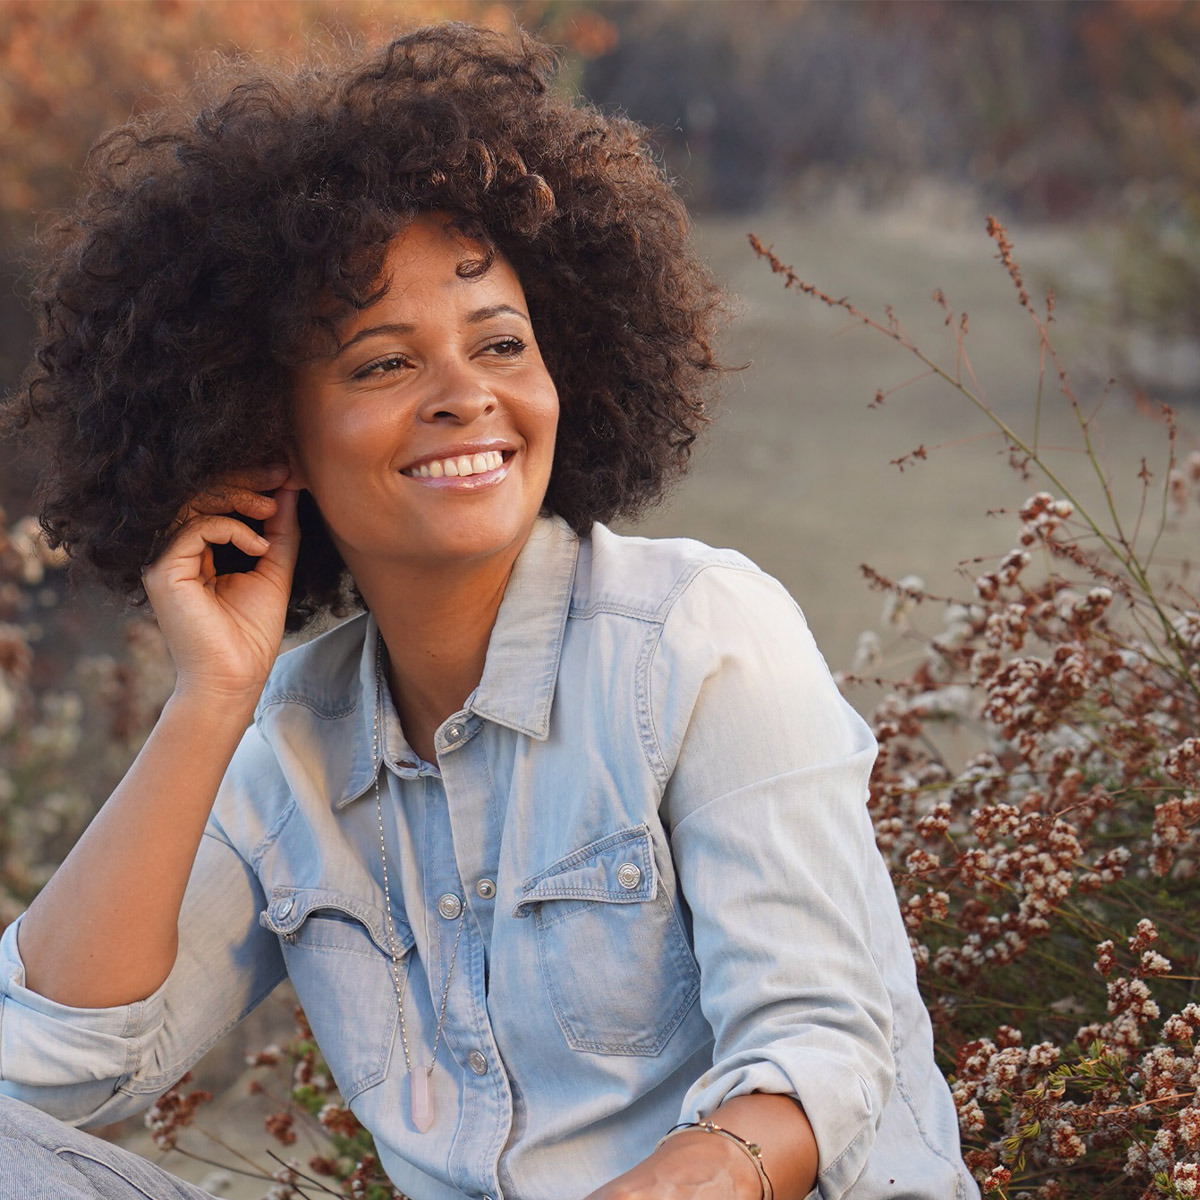 Susan Ateh color portrait. Susan is a mixed race woman who is seated cross-legged on the ground surrounded by grass and dried wildflowers. Susan has dark brown curly hair. She is smiling and has one hand resting on her ear and is wearing blue jean button-down.